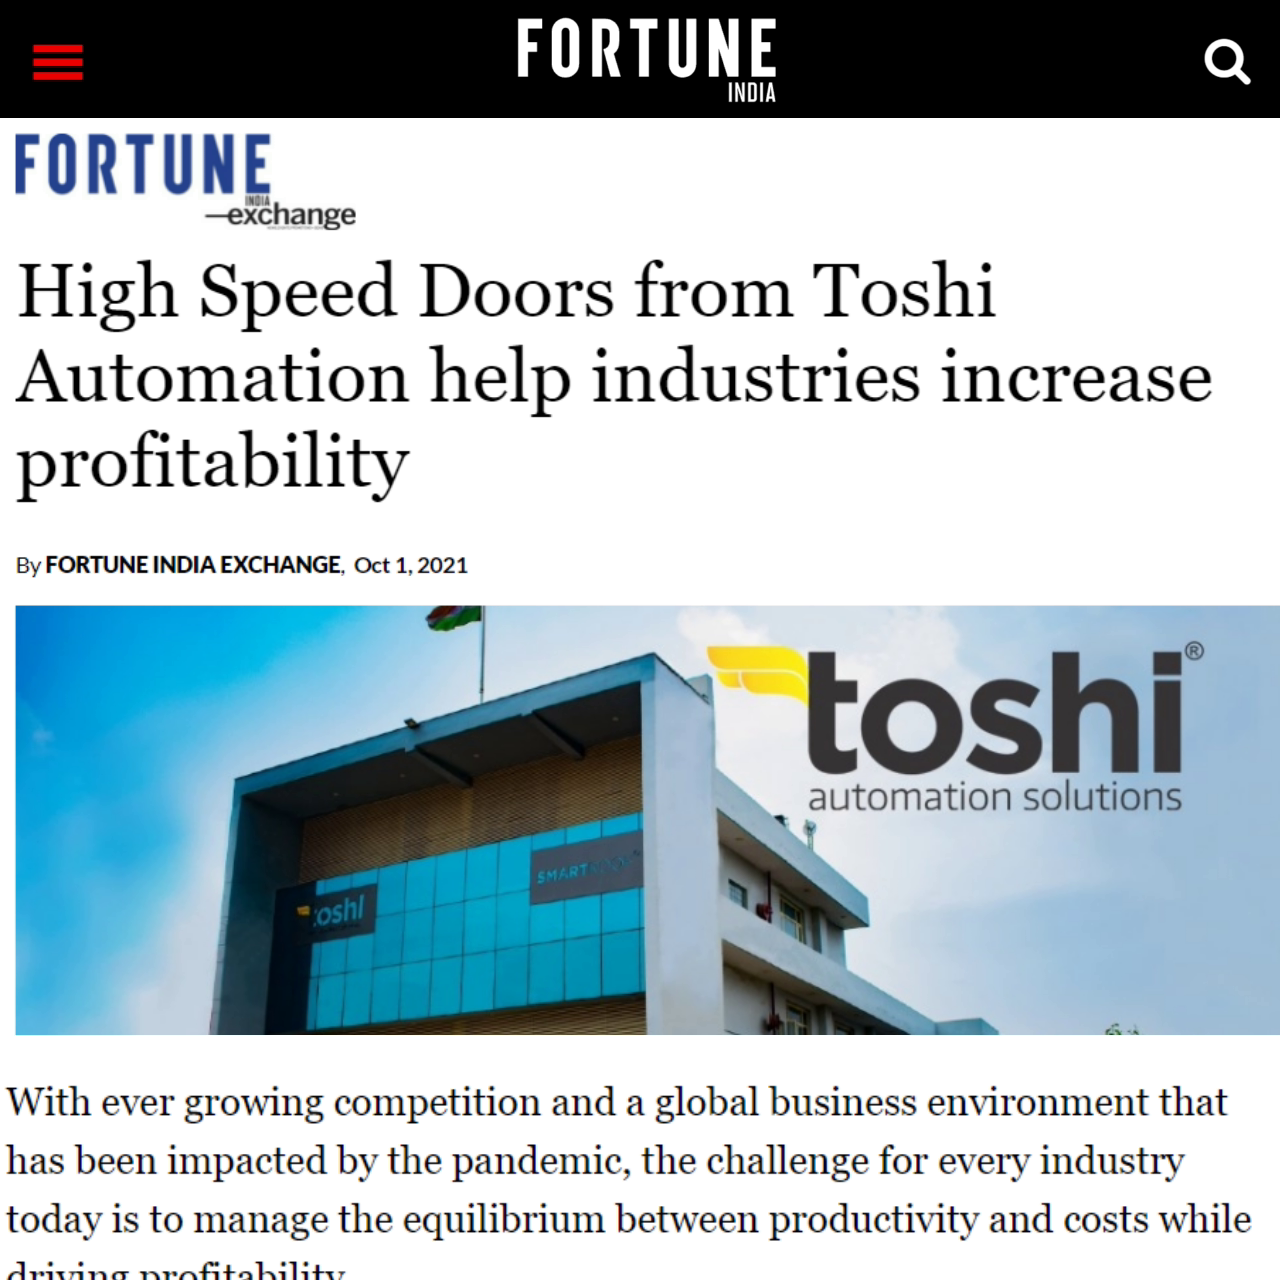 FORTUNE INDIA PUBLISHED AN ARTICAL ON TOSHI HIGH SPEED DOORS